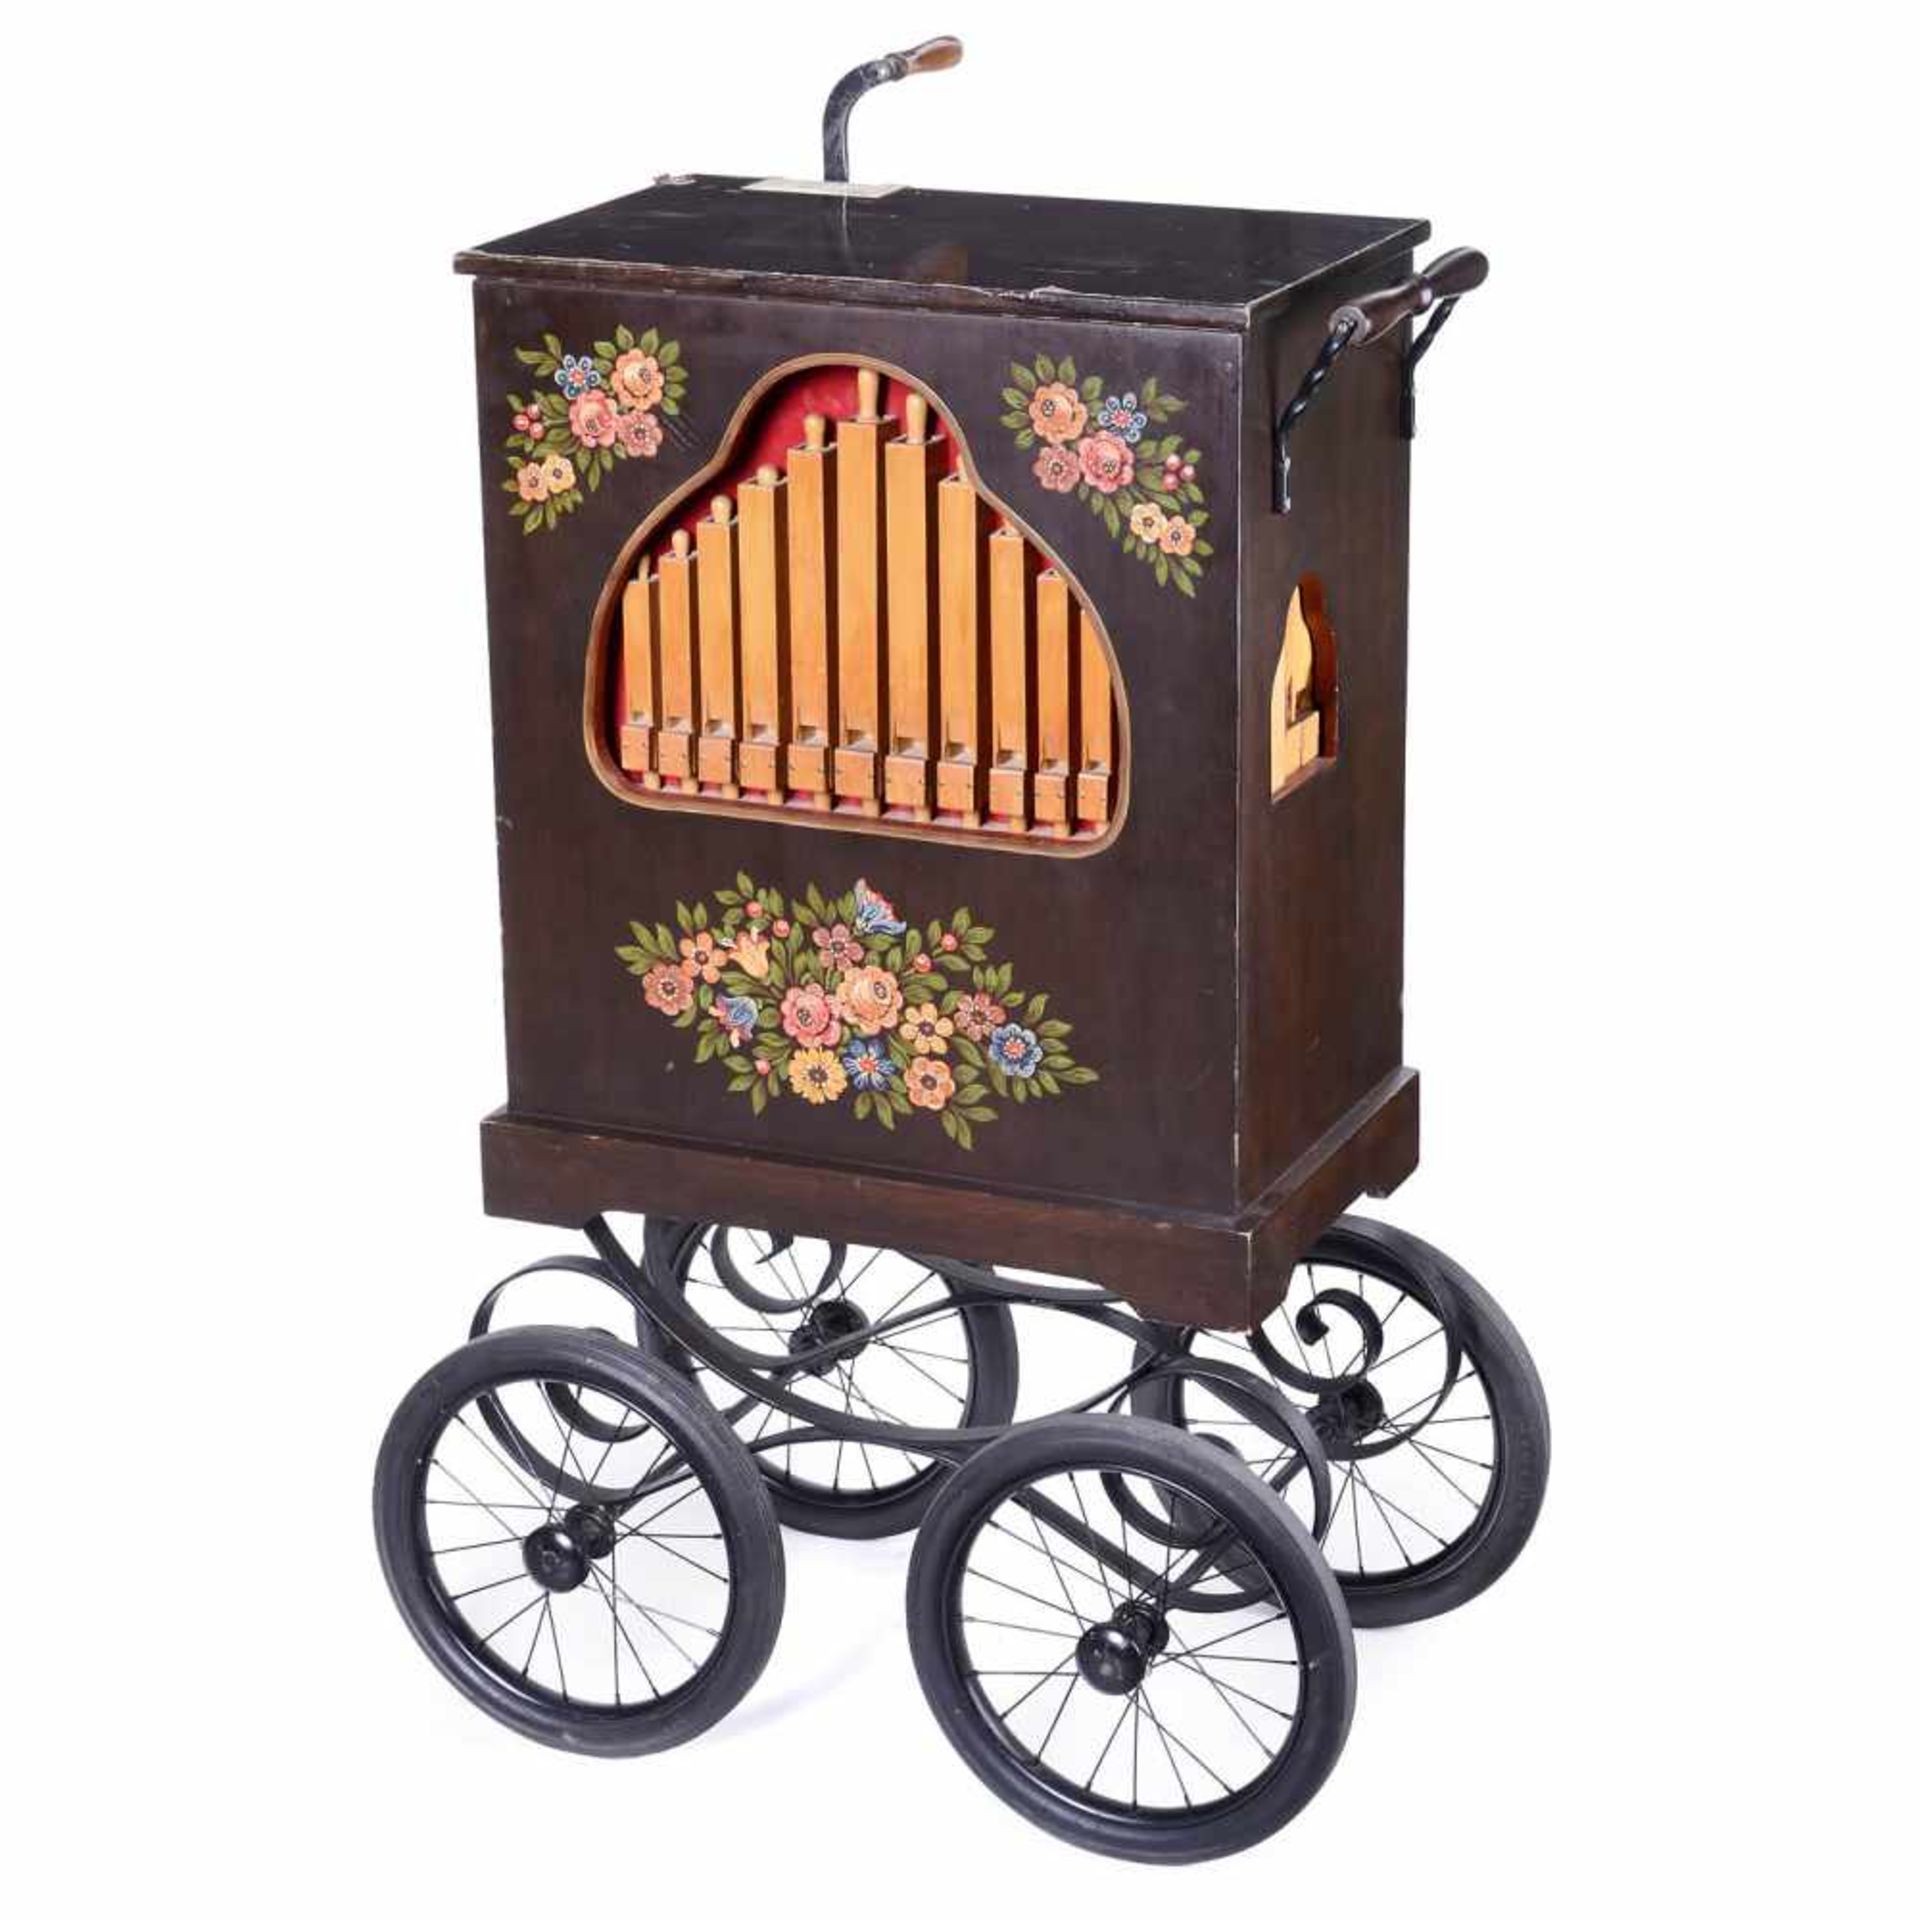 Paper-Strip Organ on Cart, c. 198016 notes, painted wood case, on wrought-iron cart with spoke